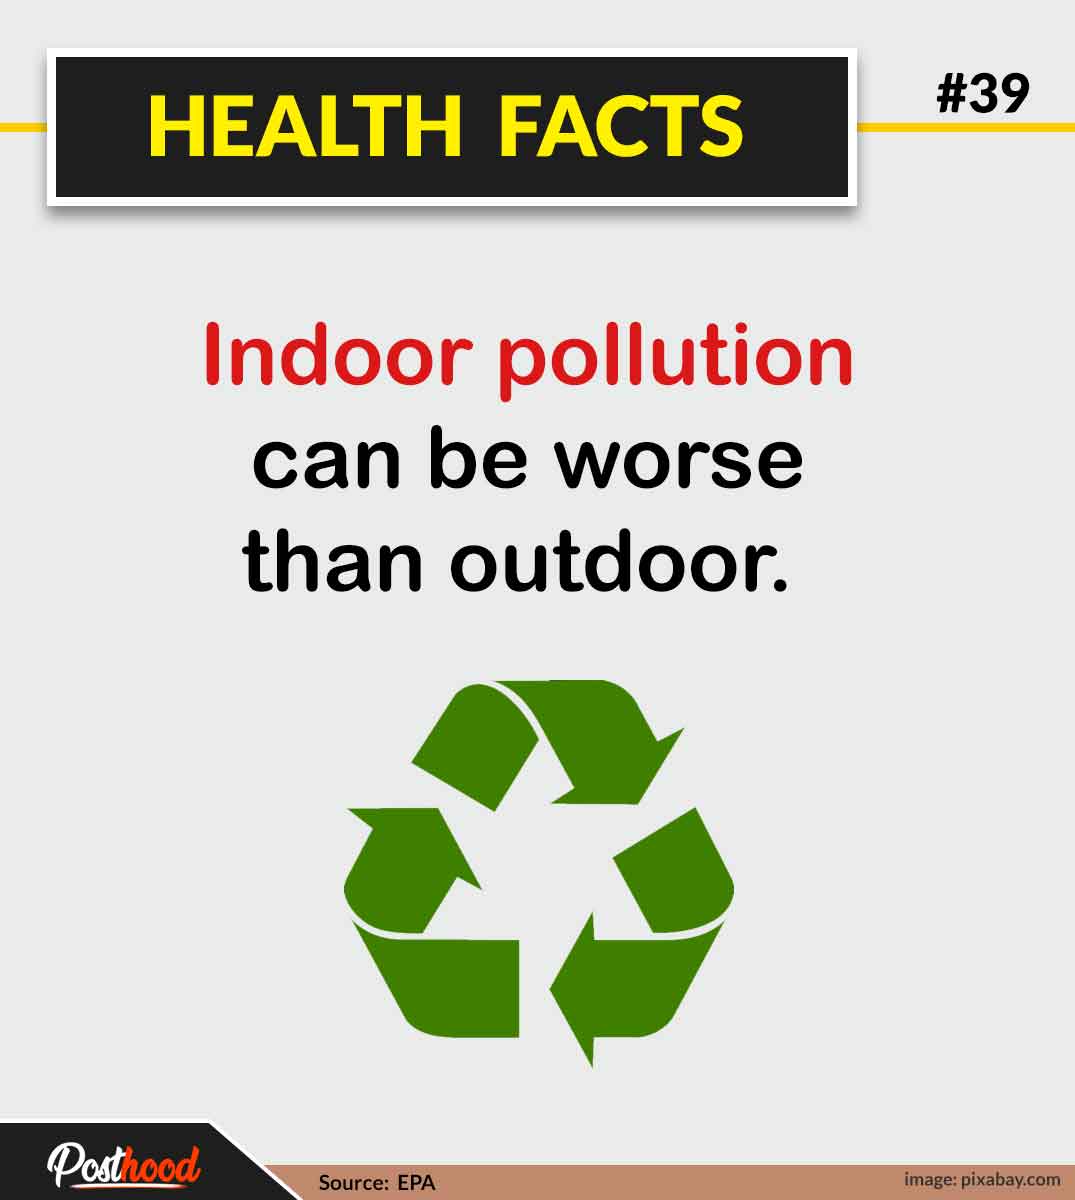 Most shocking health facts about indoor pollution that will blow your mind completely. General health facts that you should know to keep you healthy everyday.